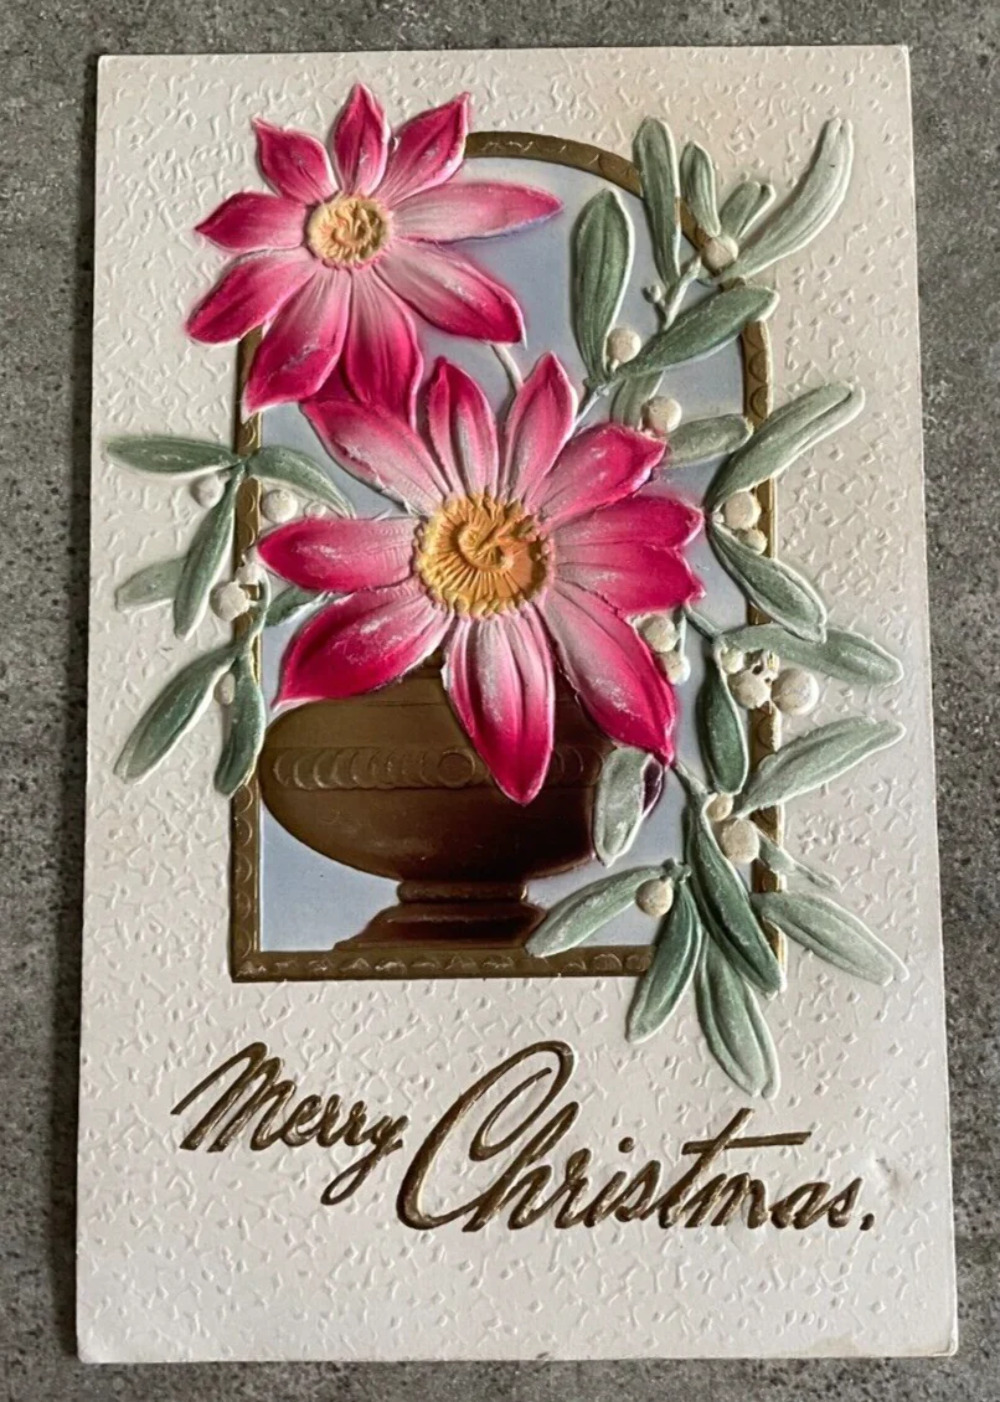 1913 German Embossed Christmas Card Postcard Posted and Stamped Rare Vintage 